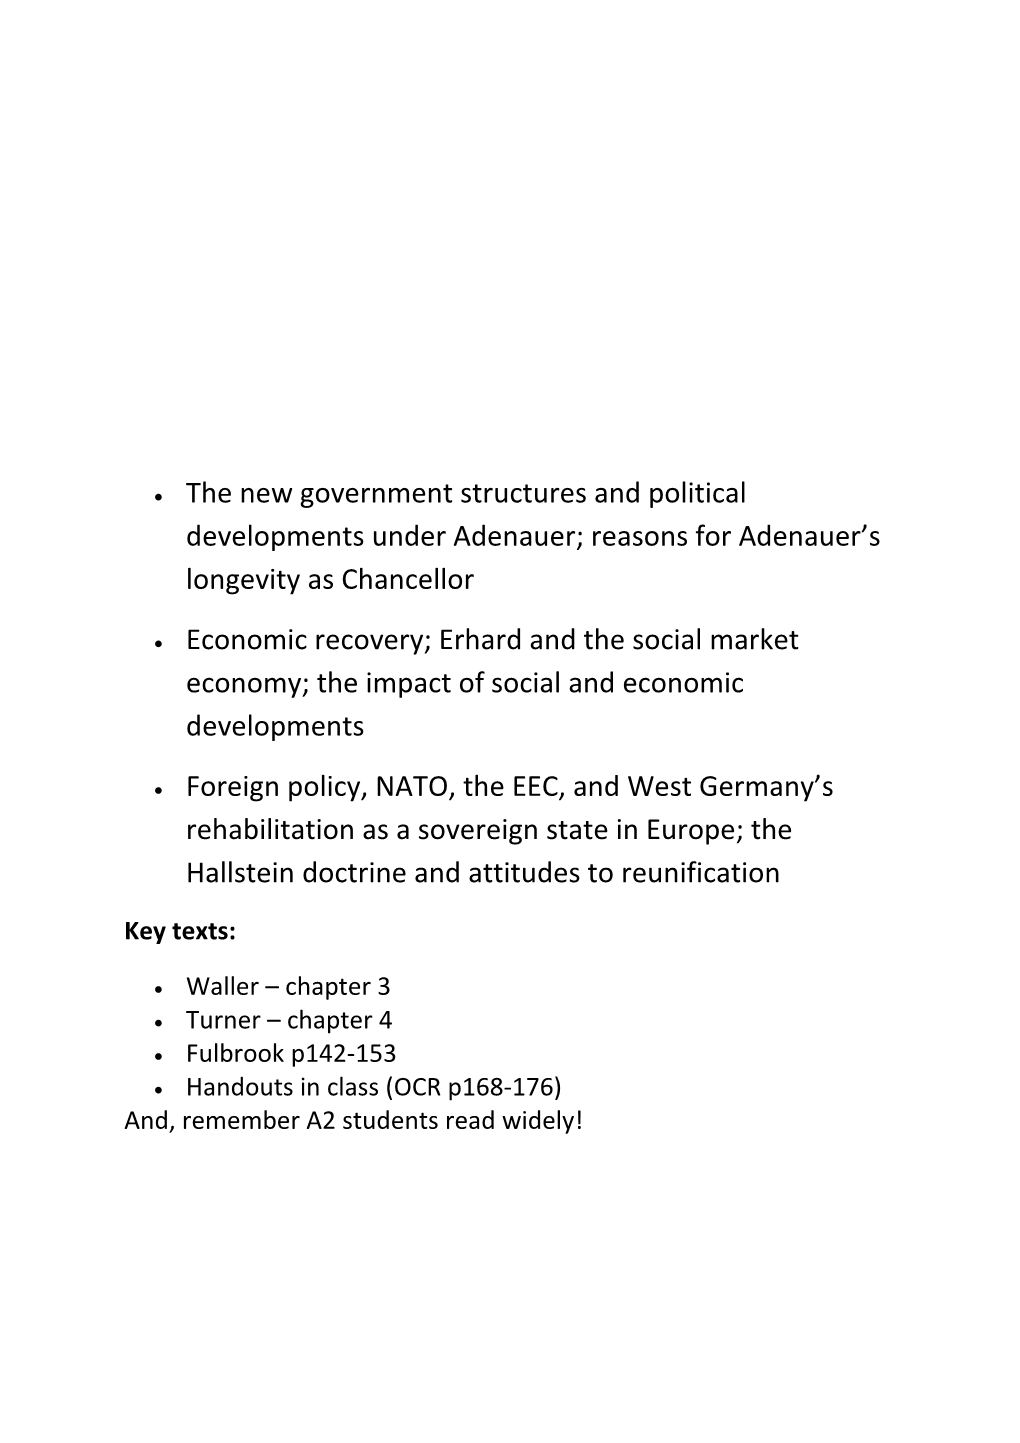 The New Government Structures and Political Developments Under Adenauer; Reasons for Adenauer